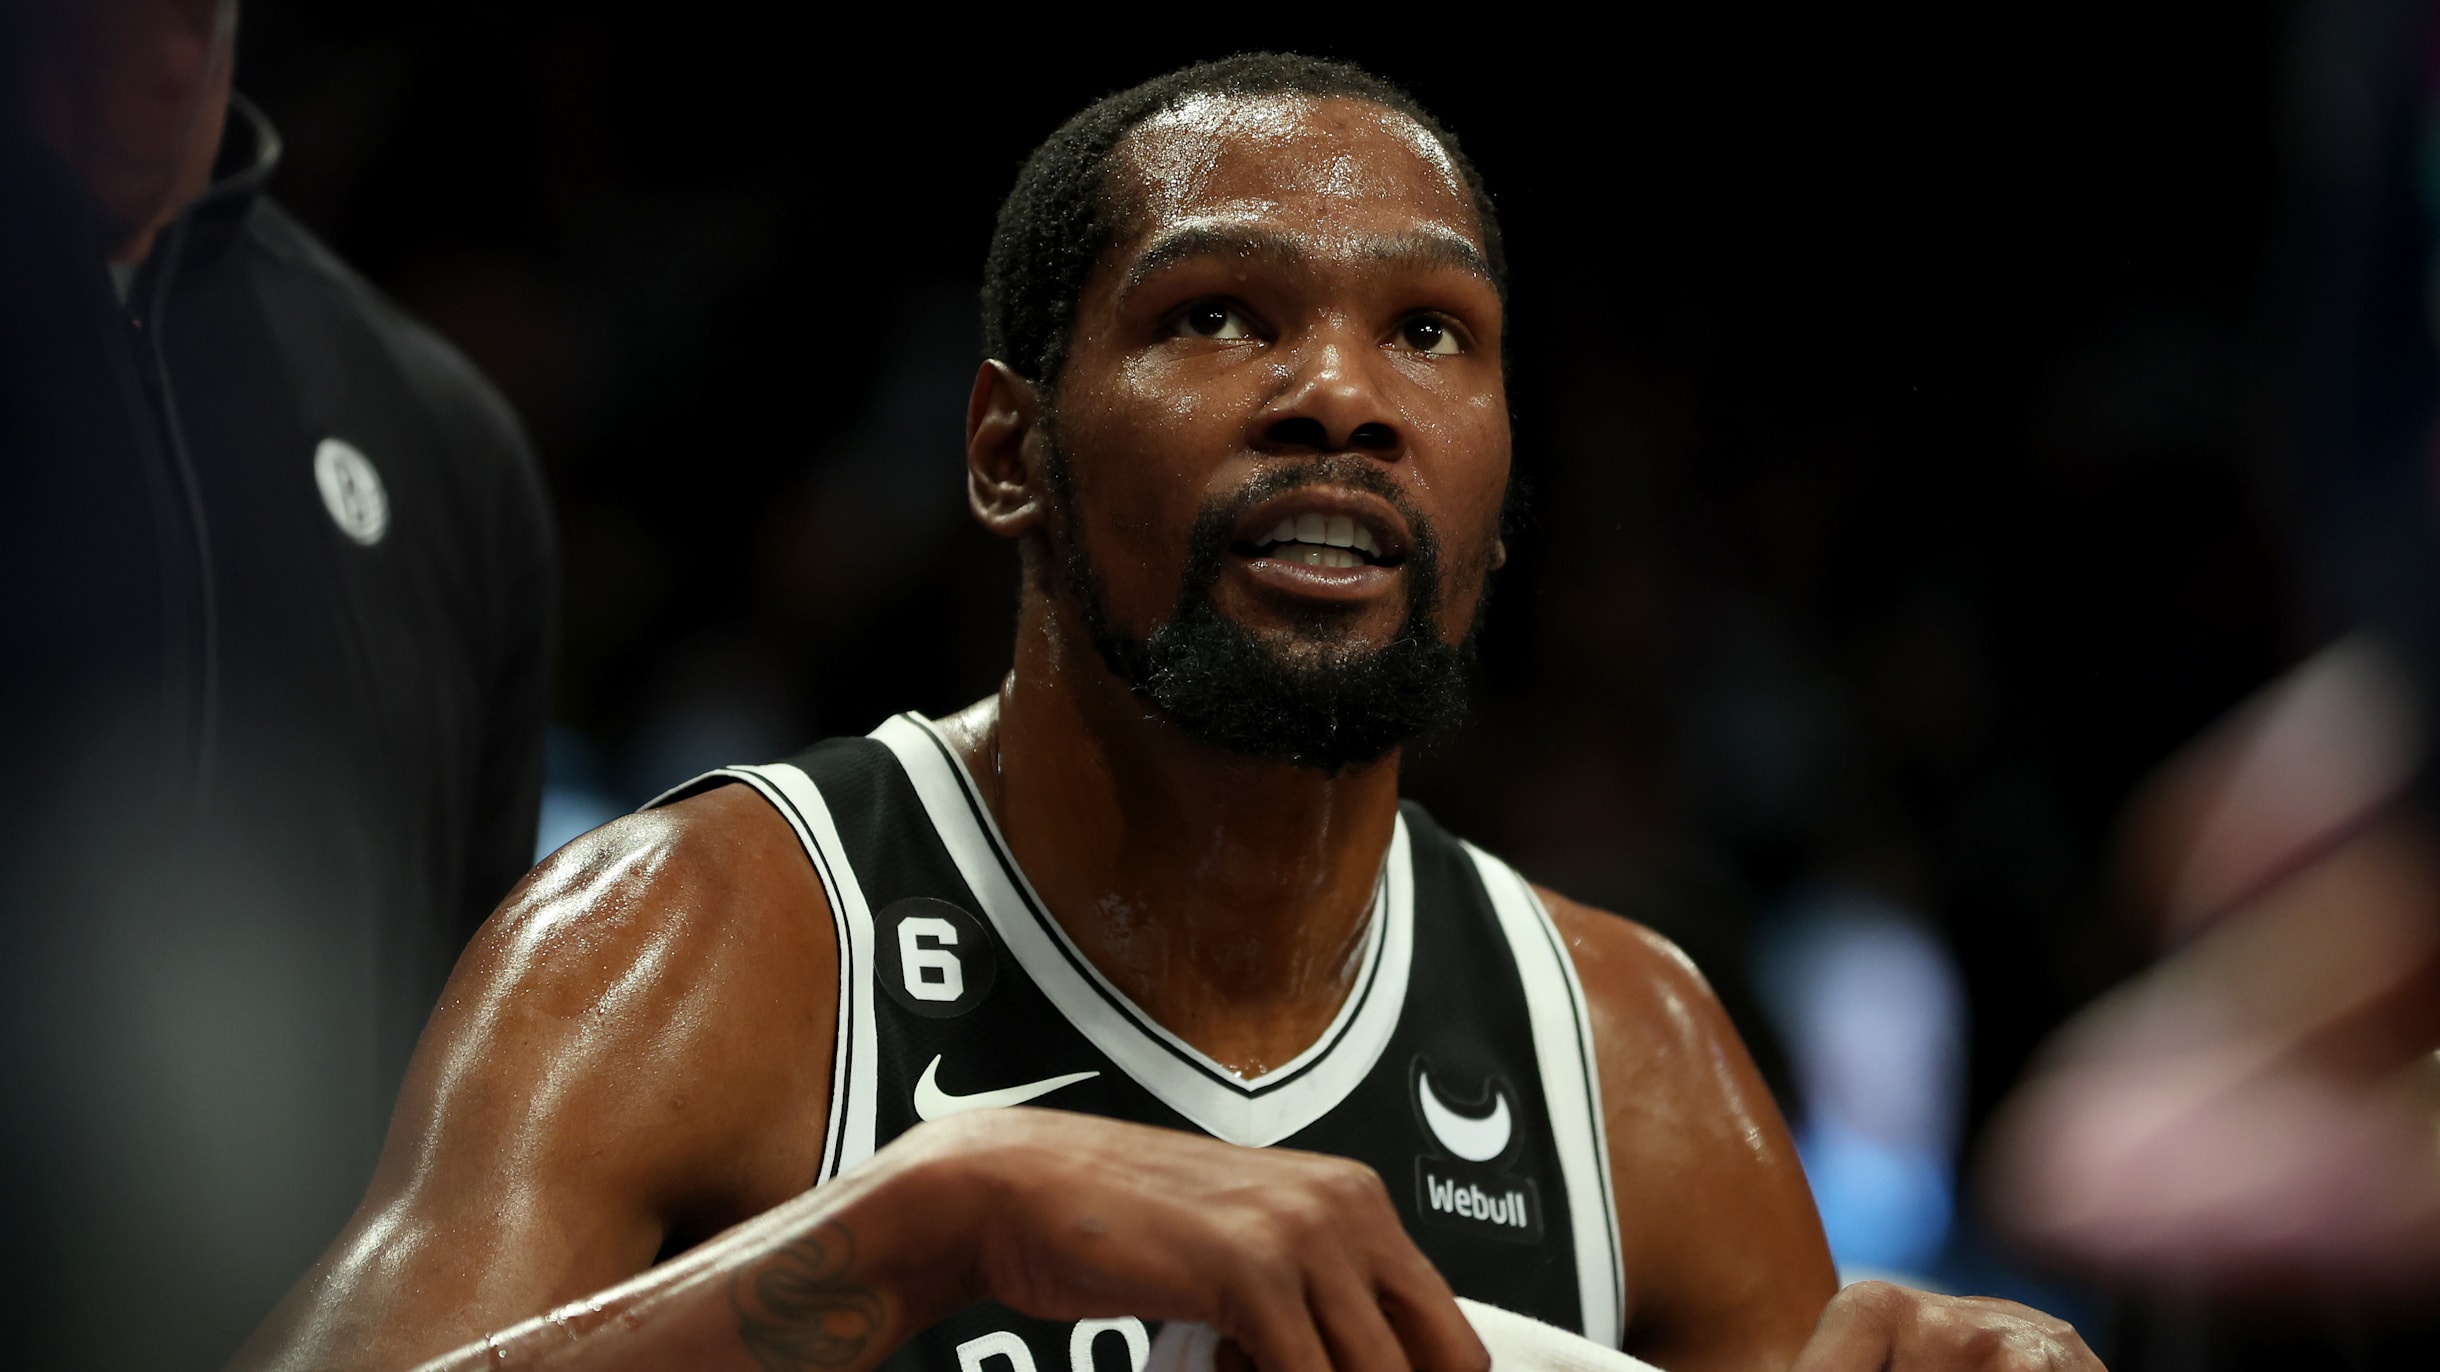 As Brooklyn's best all-around player, it's time for Kevin Durant